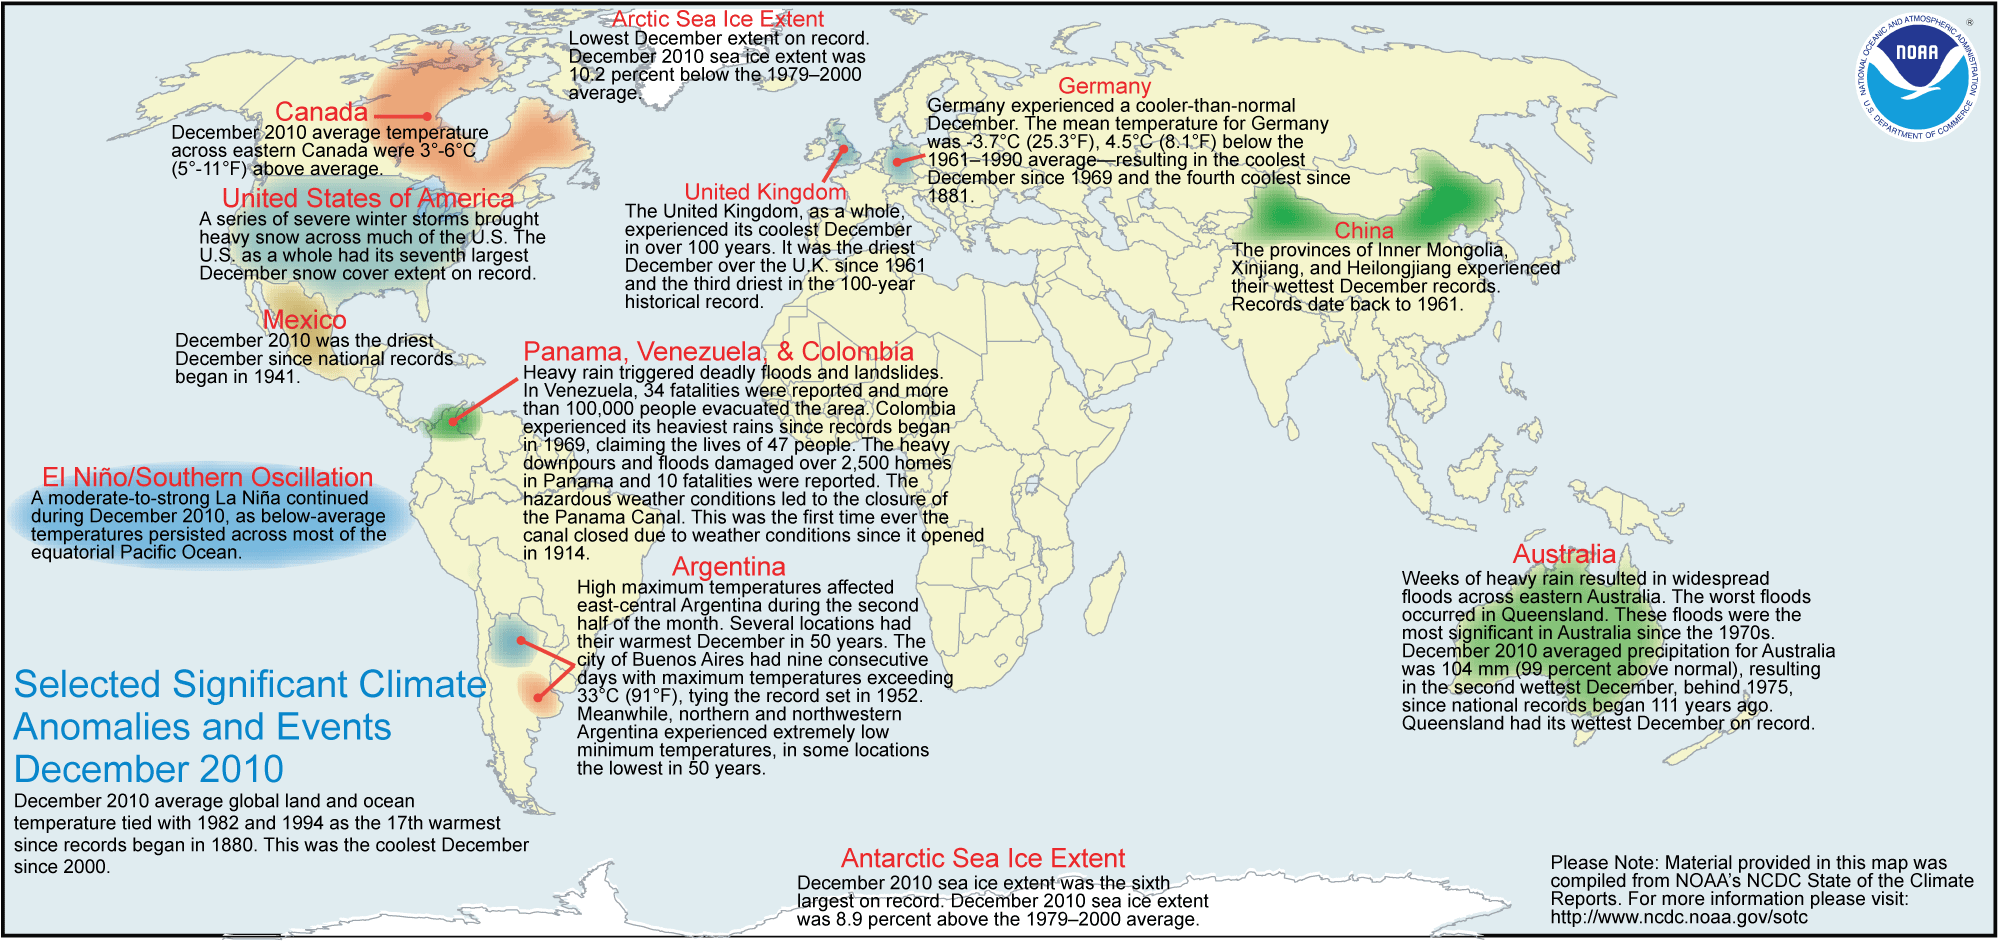 Significant Climate Anomalies Dec 2010